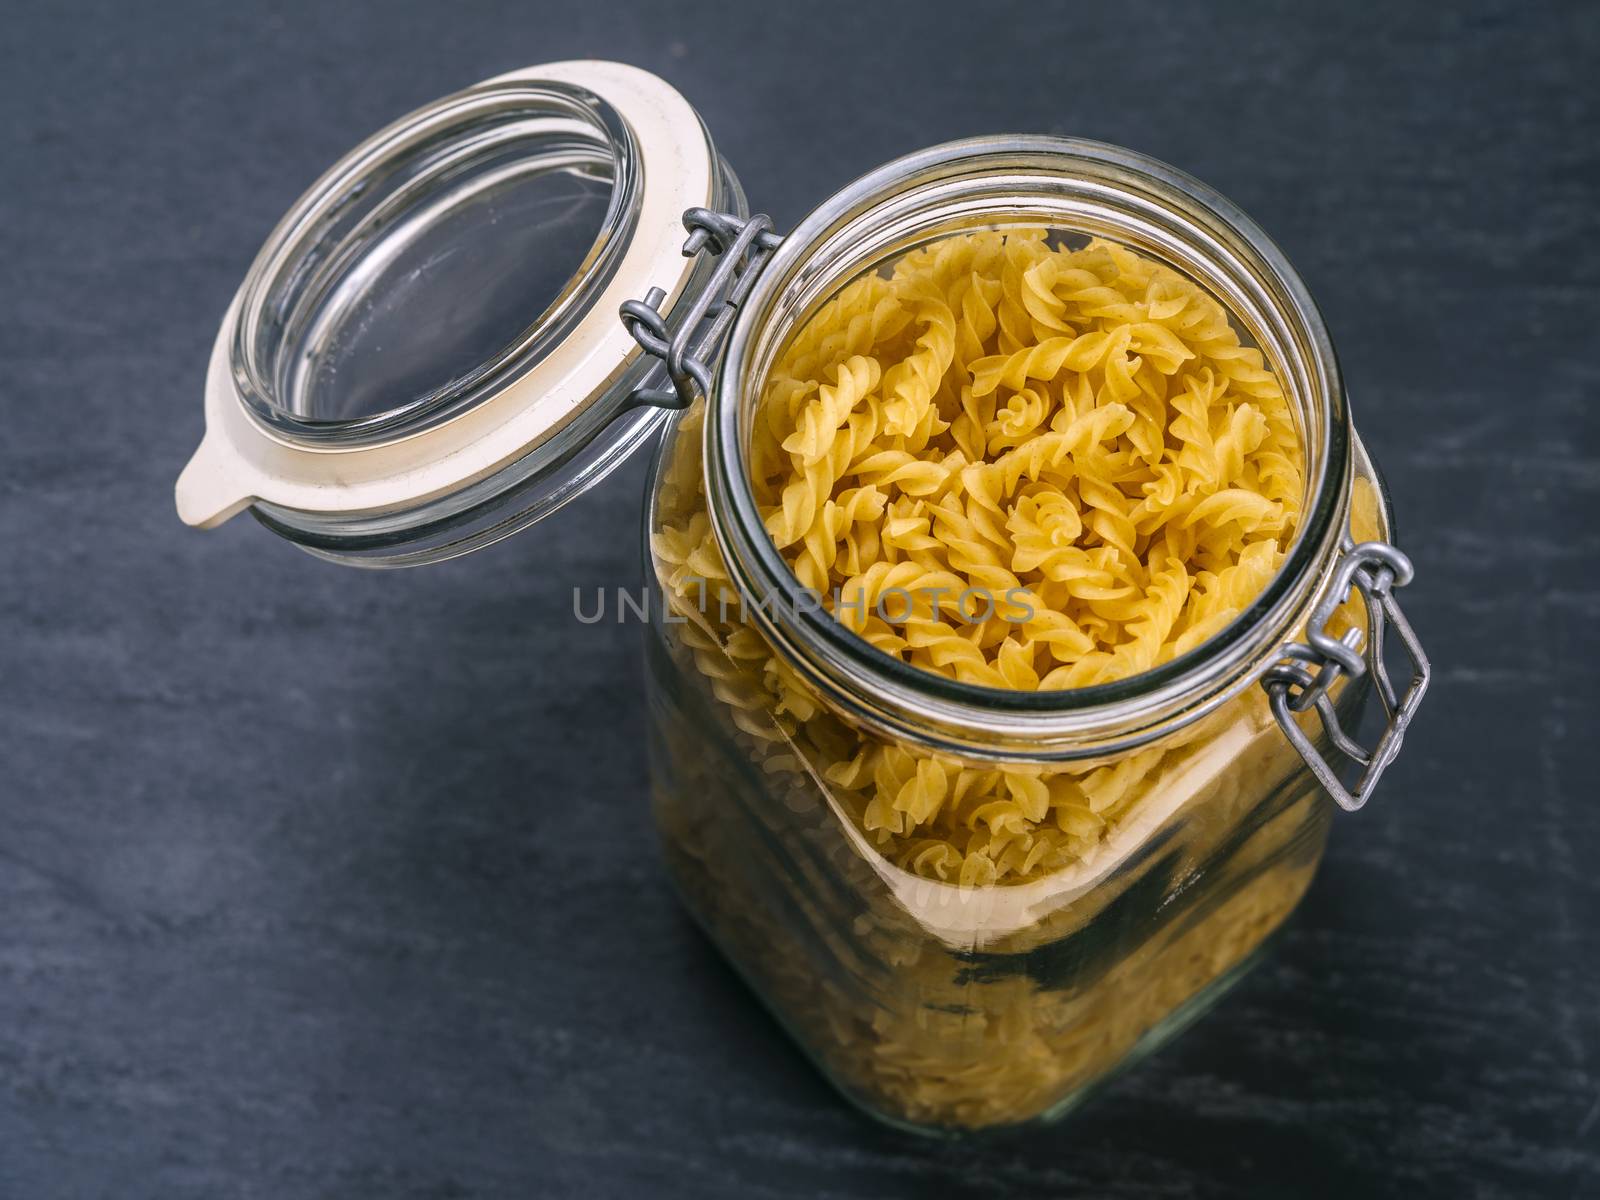 Fusilli pasta in a jar by sumners